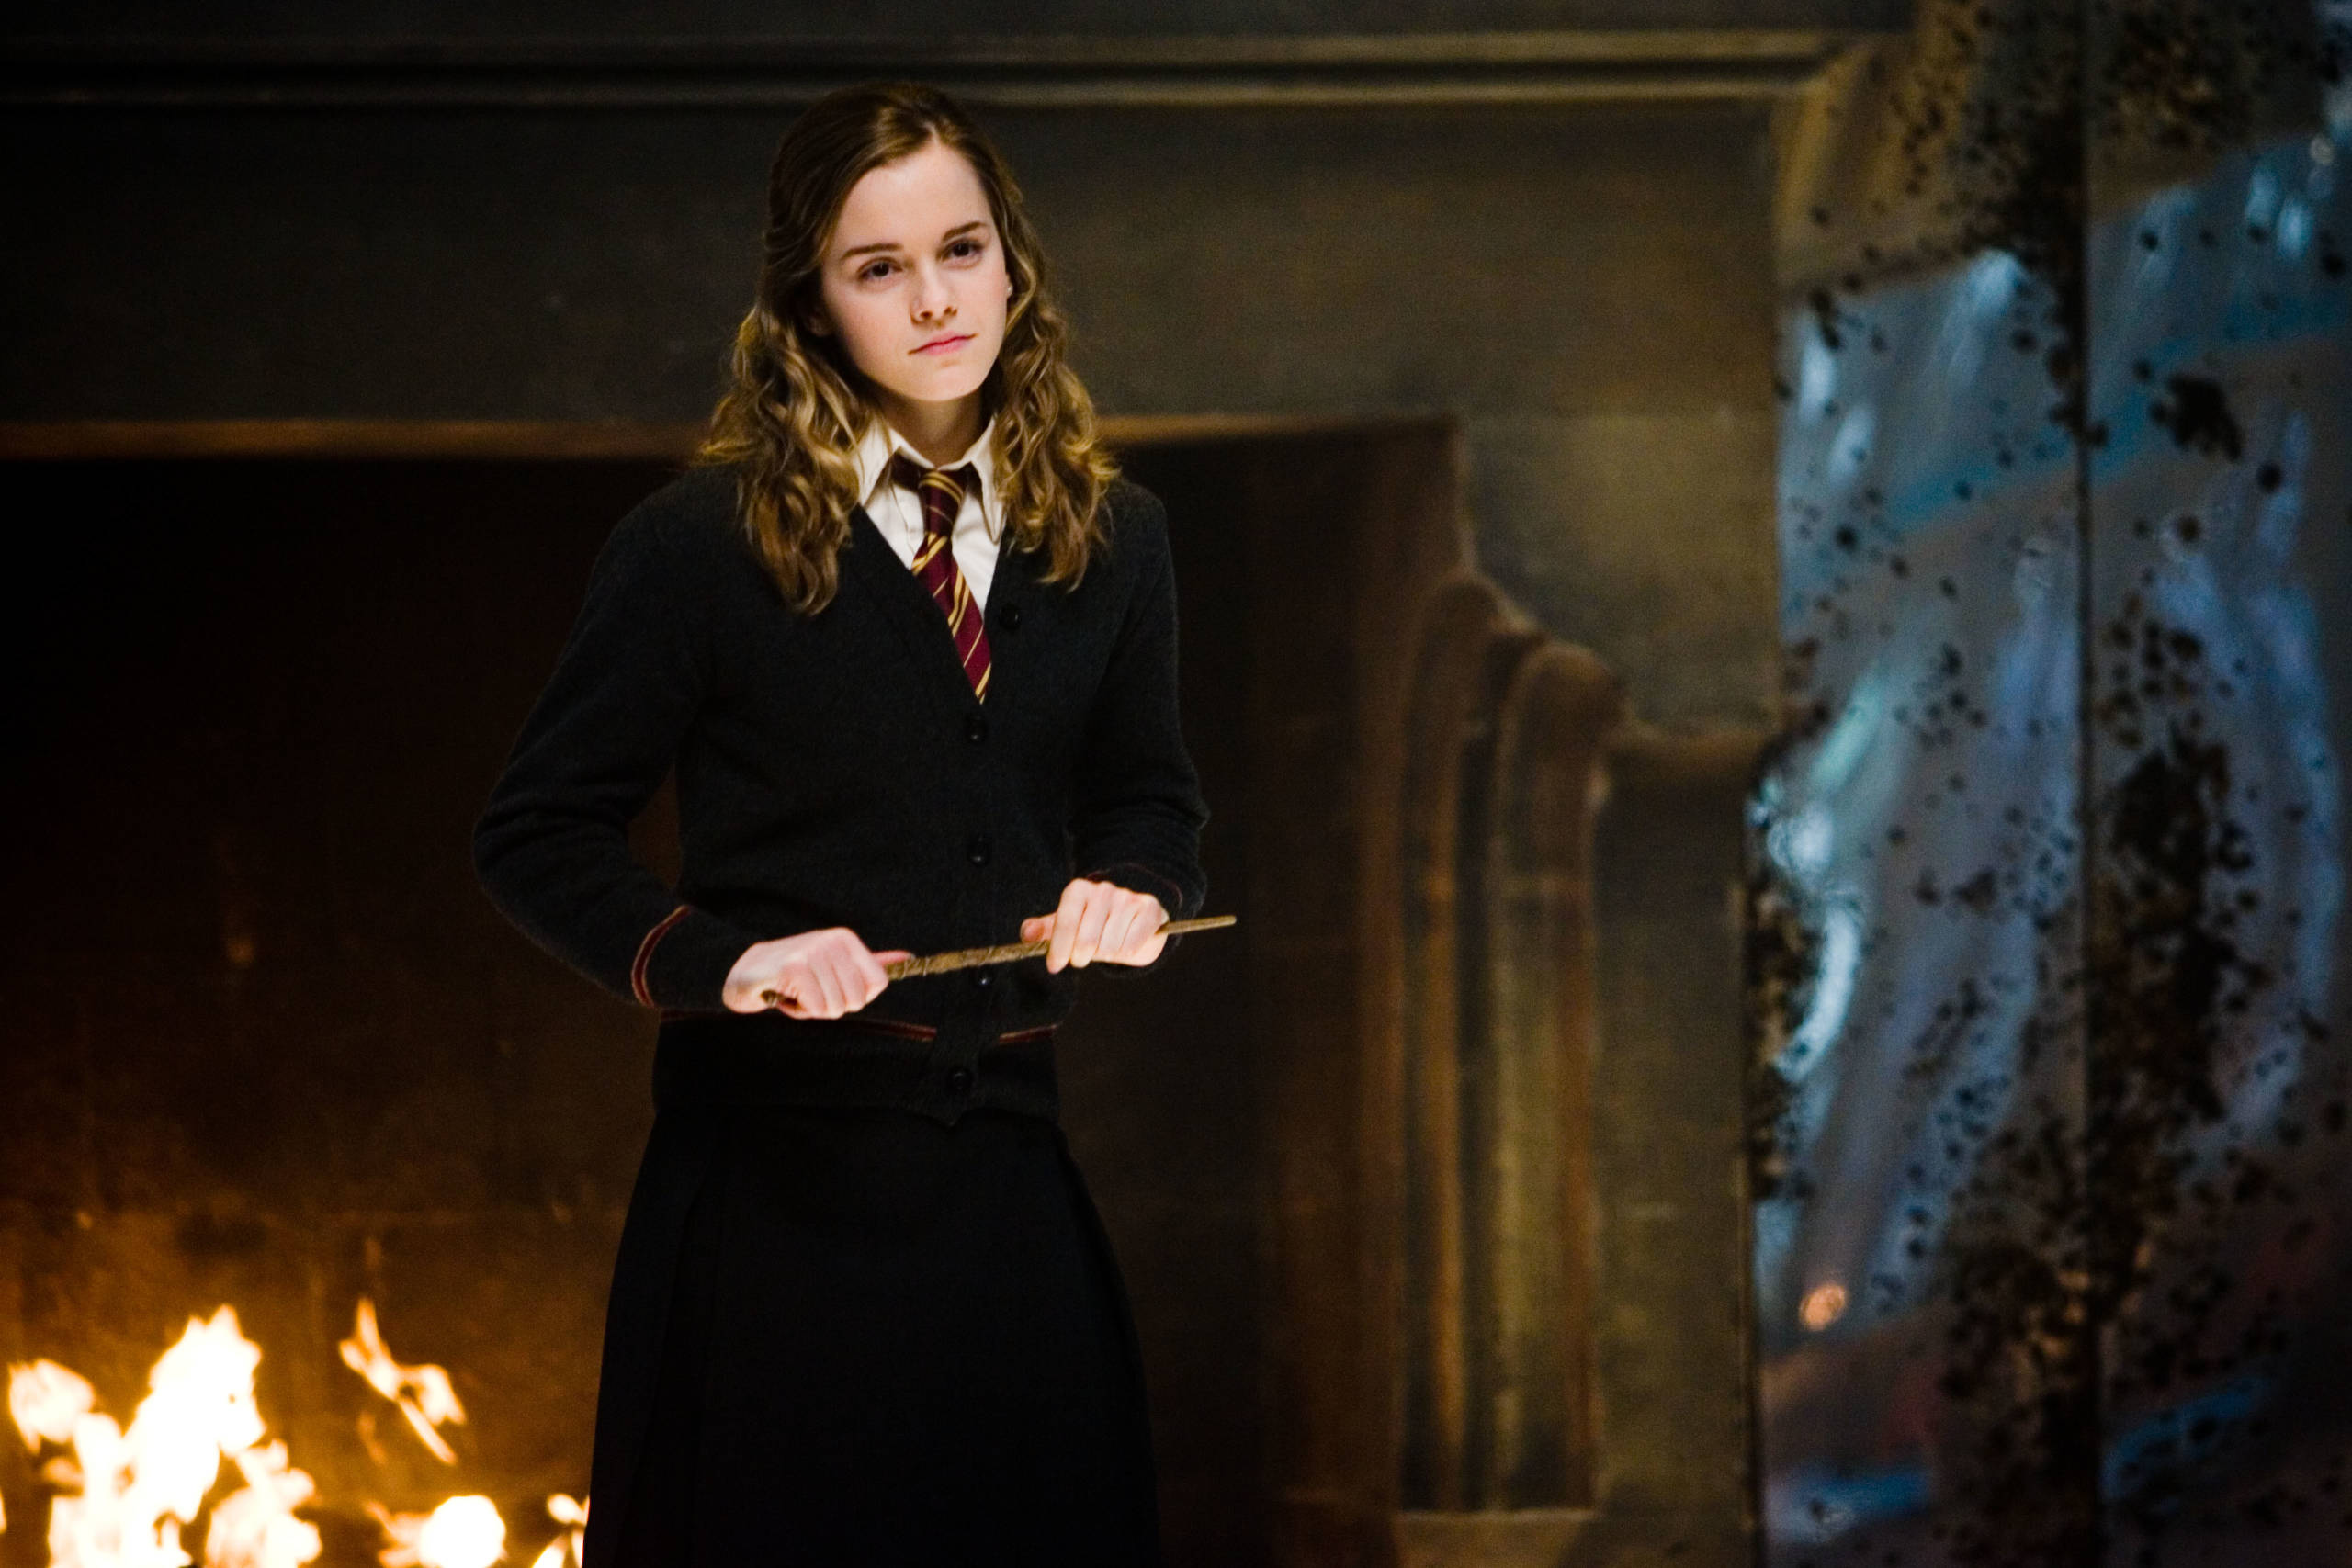 Learn How to Study Like Hermione Granger